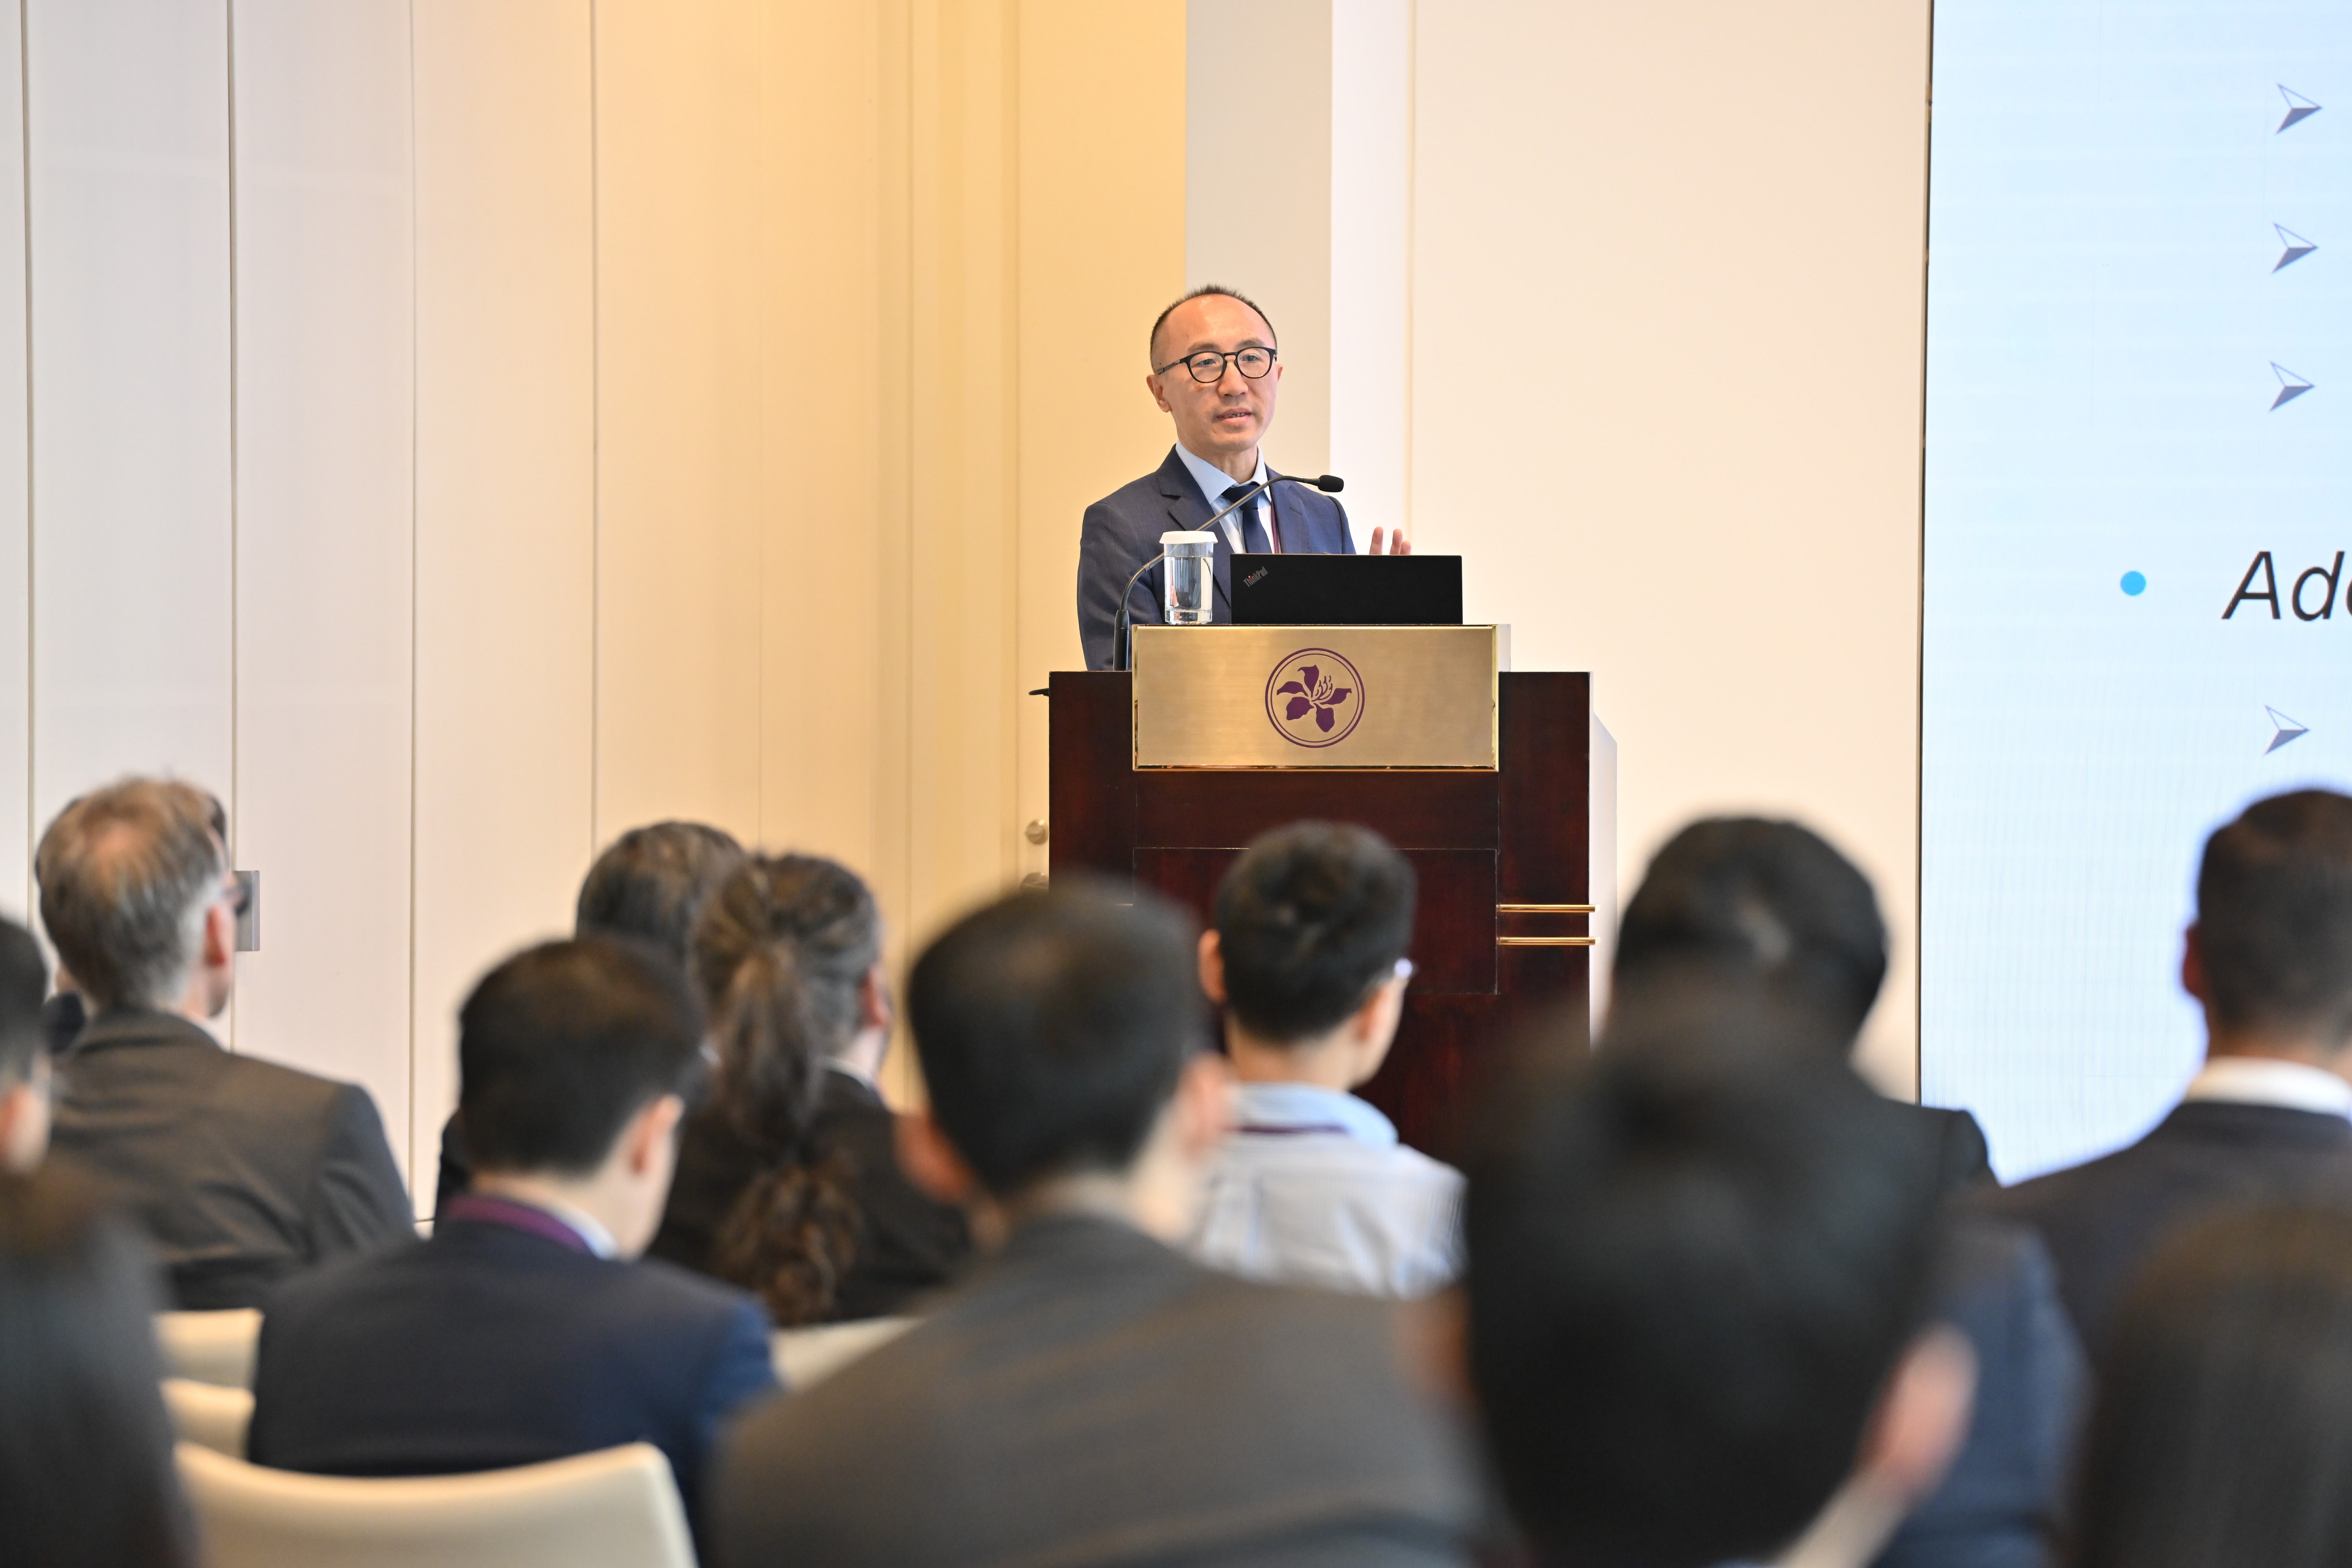 Dr Dong He, Deputy Director, Monetary and Capital Markets Department of International Monetary Fund, delivers a keynote speech for the morning session of the International Conference on Central Bank Digital Currencies and Payment Systems.